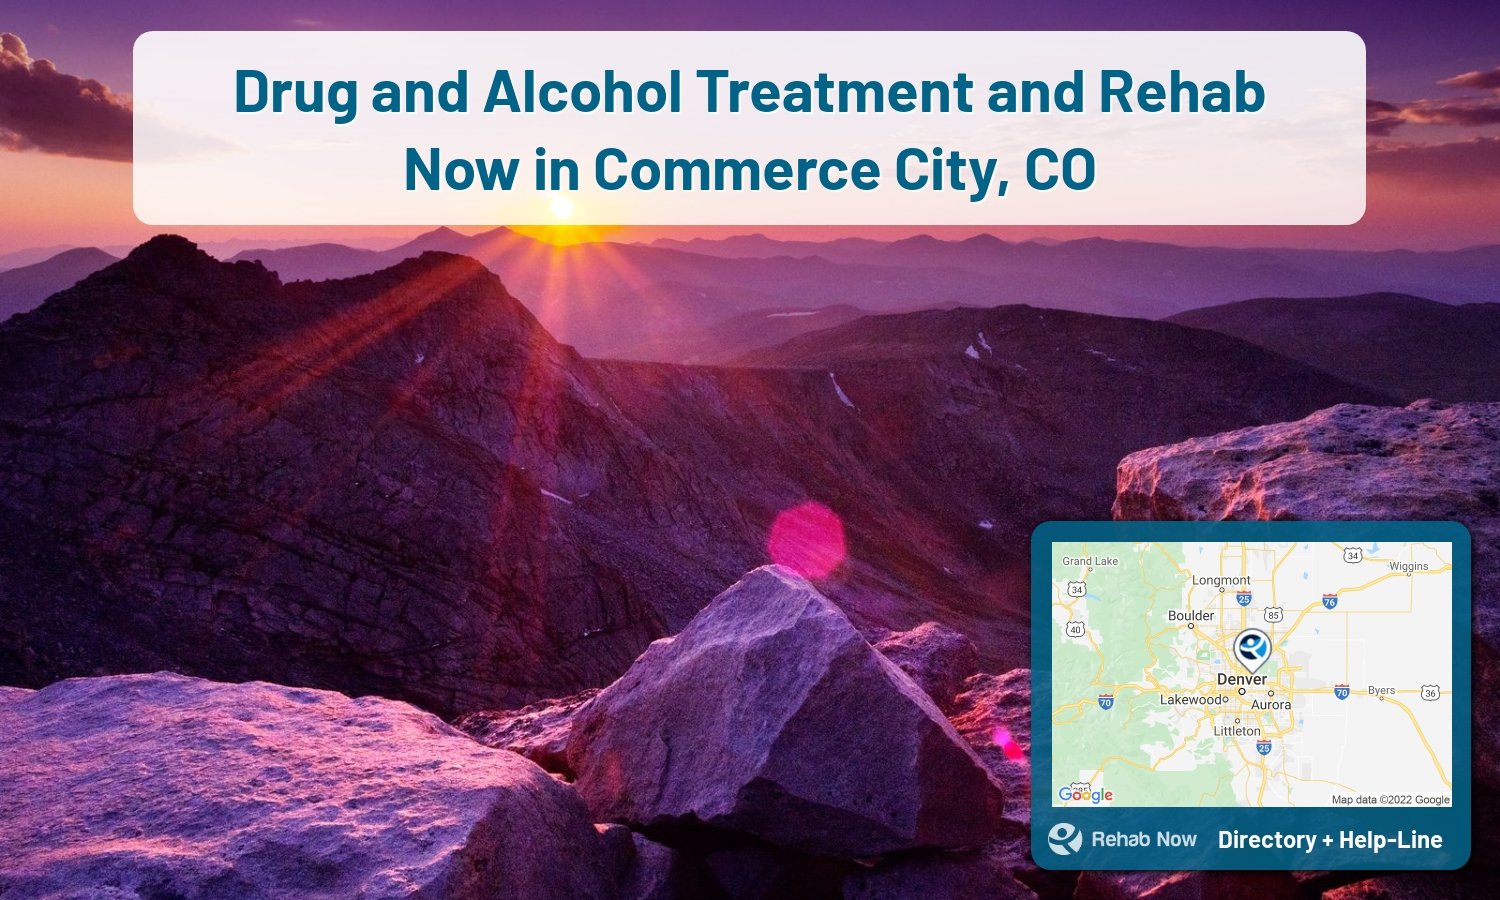 Ready to pick a rehab center in Commerce City? Get off alcohol, opiates, and other drugs, by selecting top drug rehab centers in Colorado